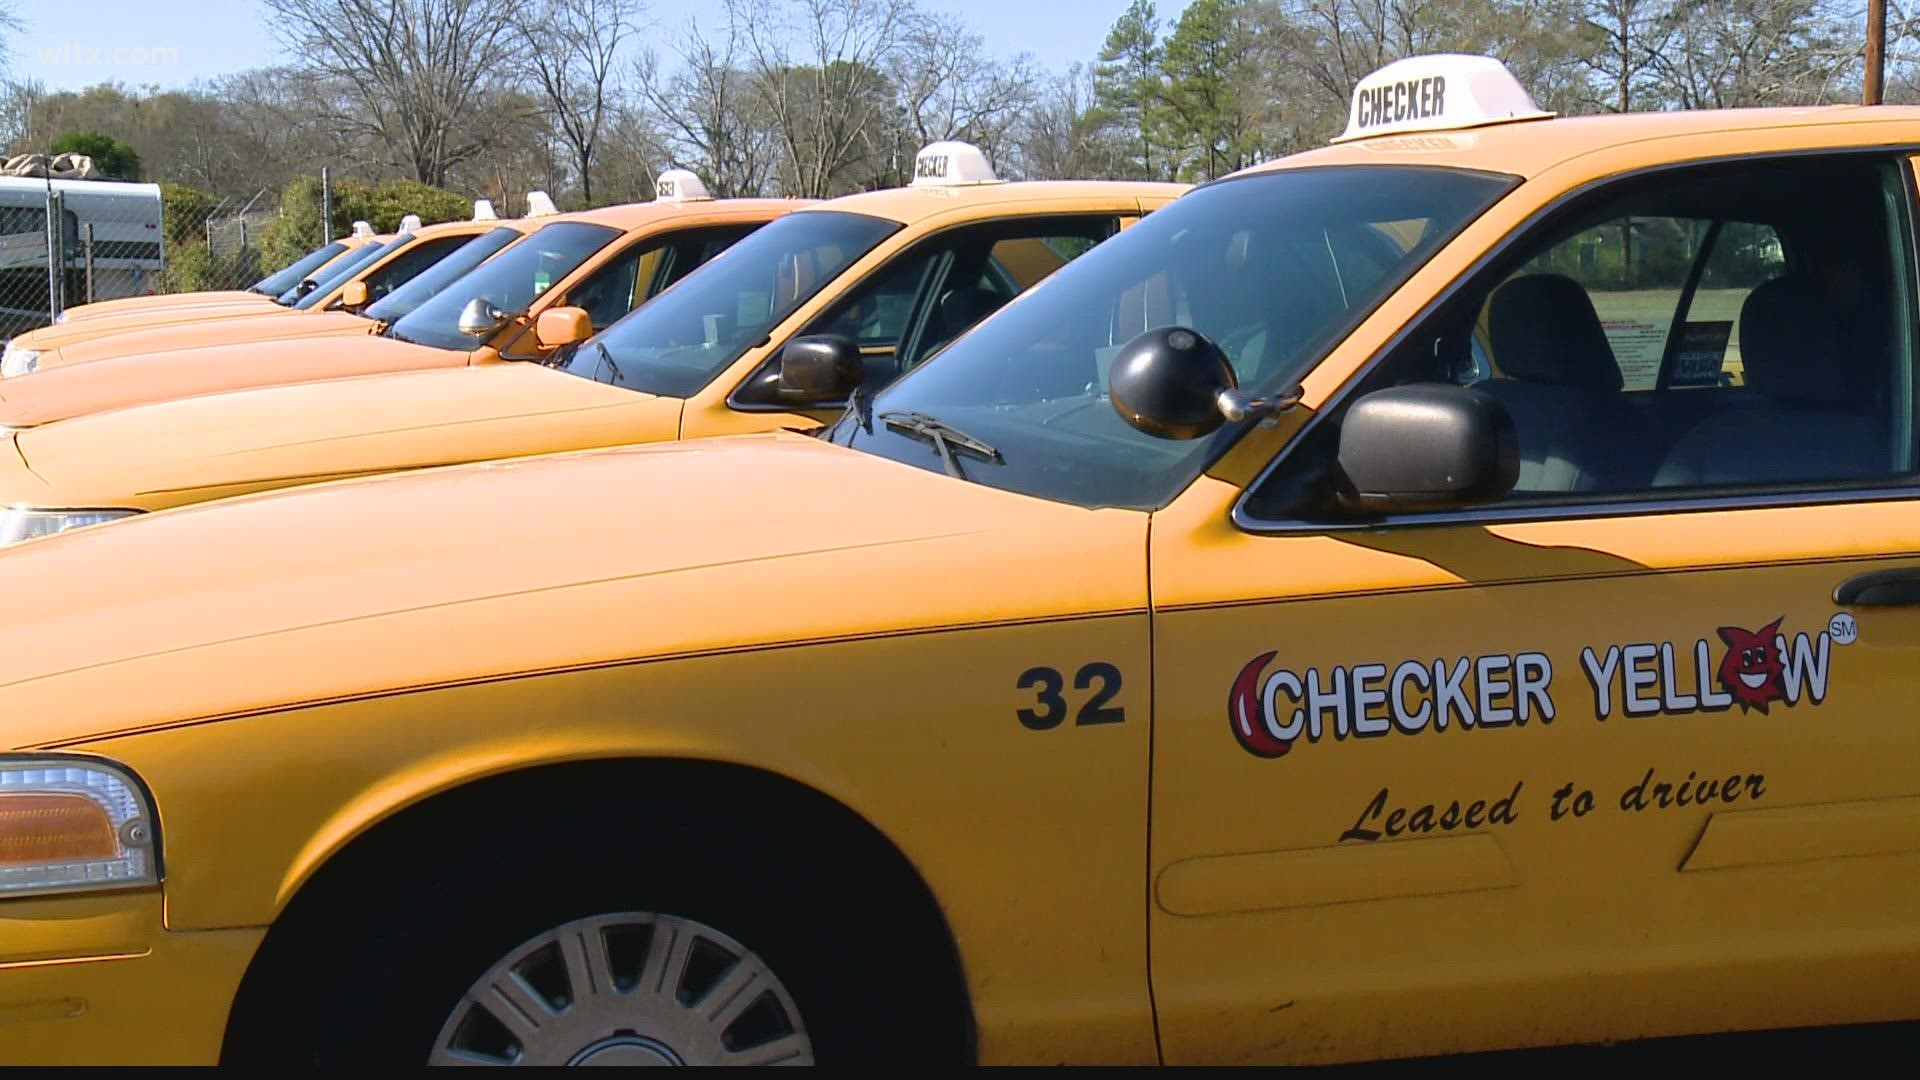 KW Beverage and Checker Yellow Cab are partnering to once again offer free rides home on New Year's Eve.